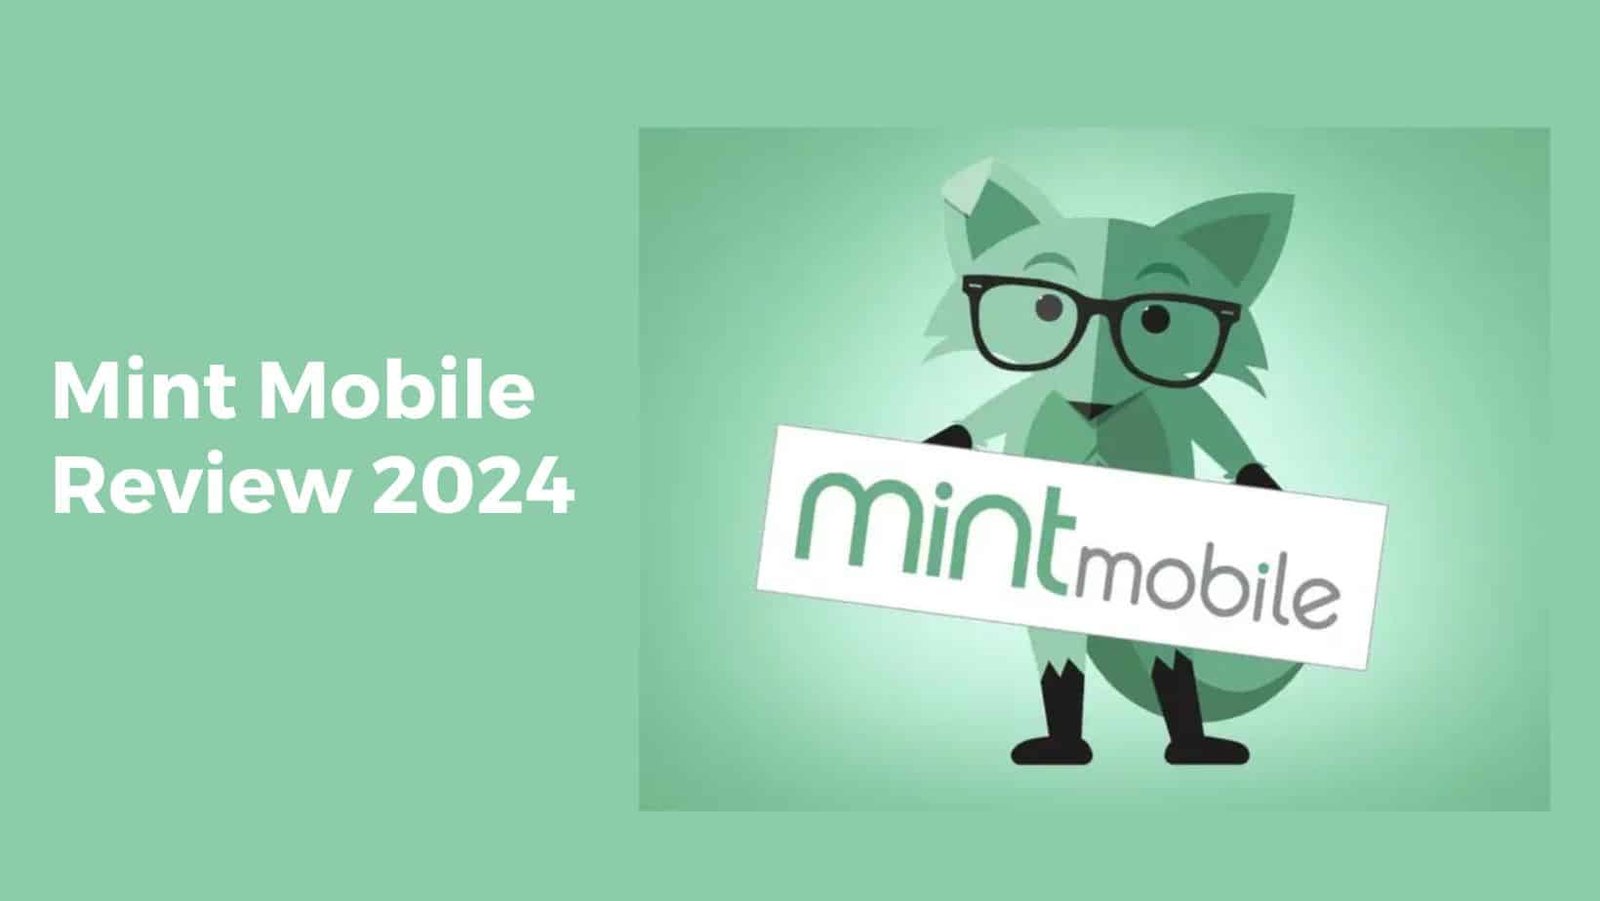 Mint Mobile Review 2024 A Comprehensive Look at the Popular Carrier